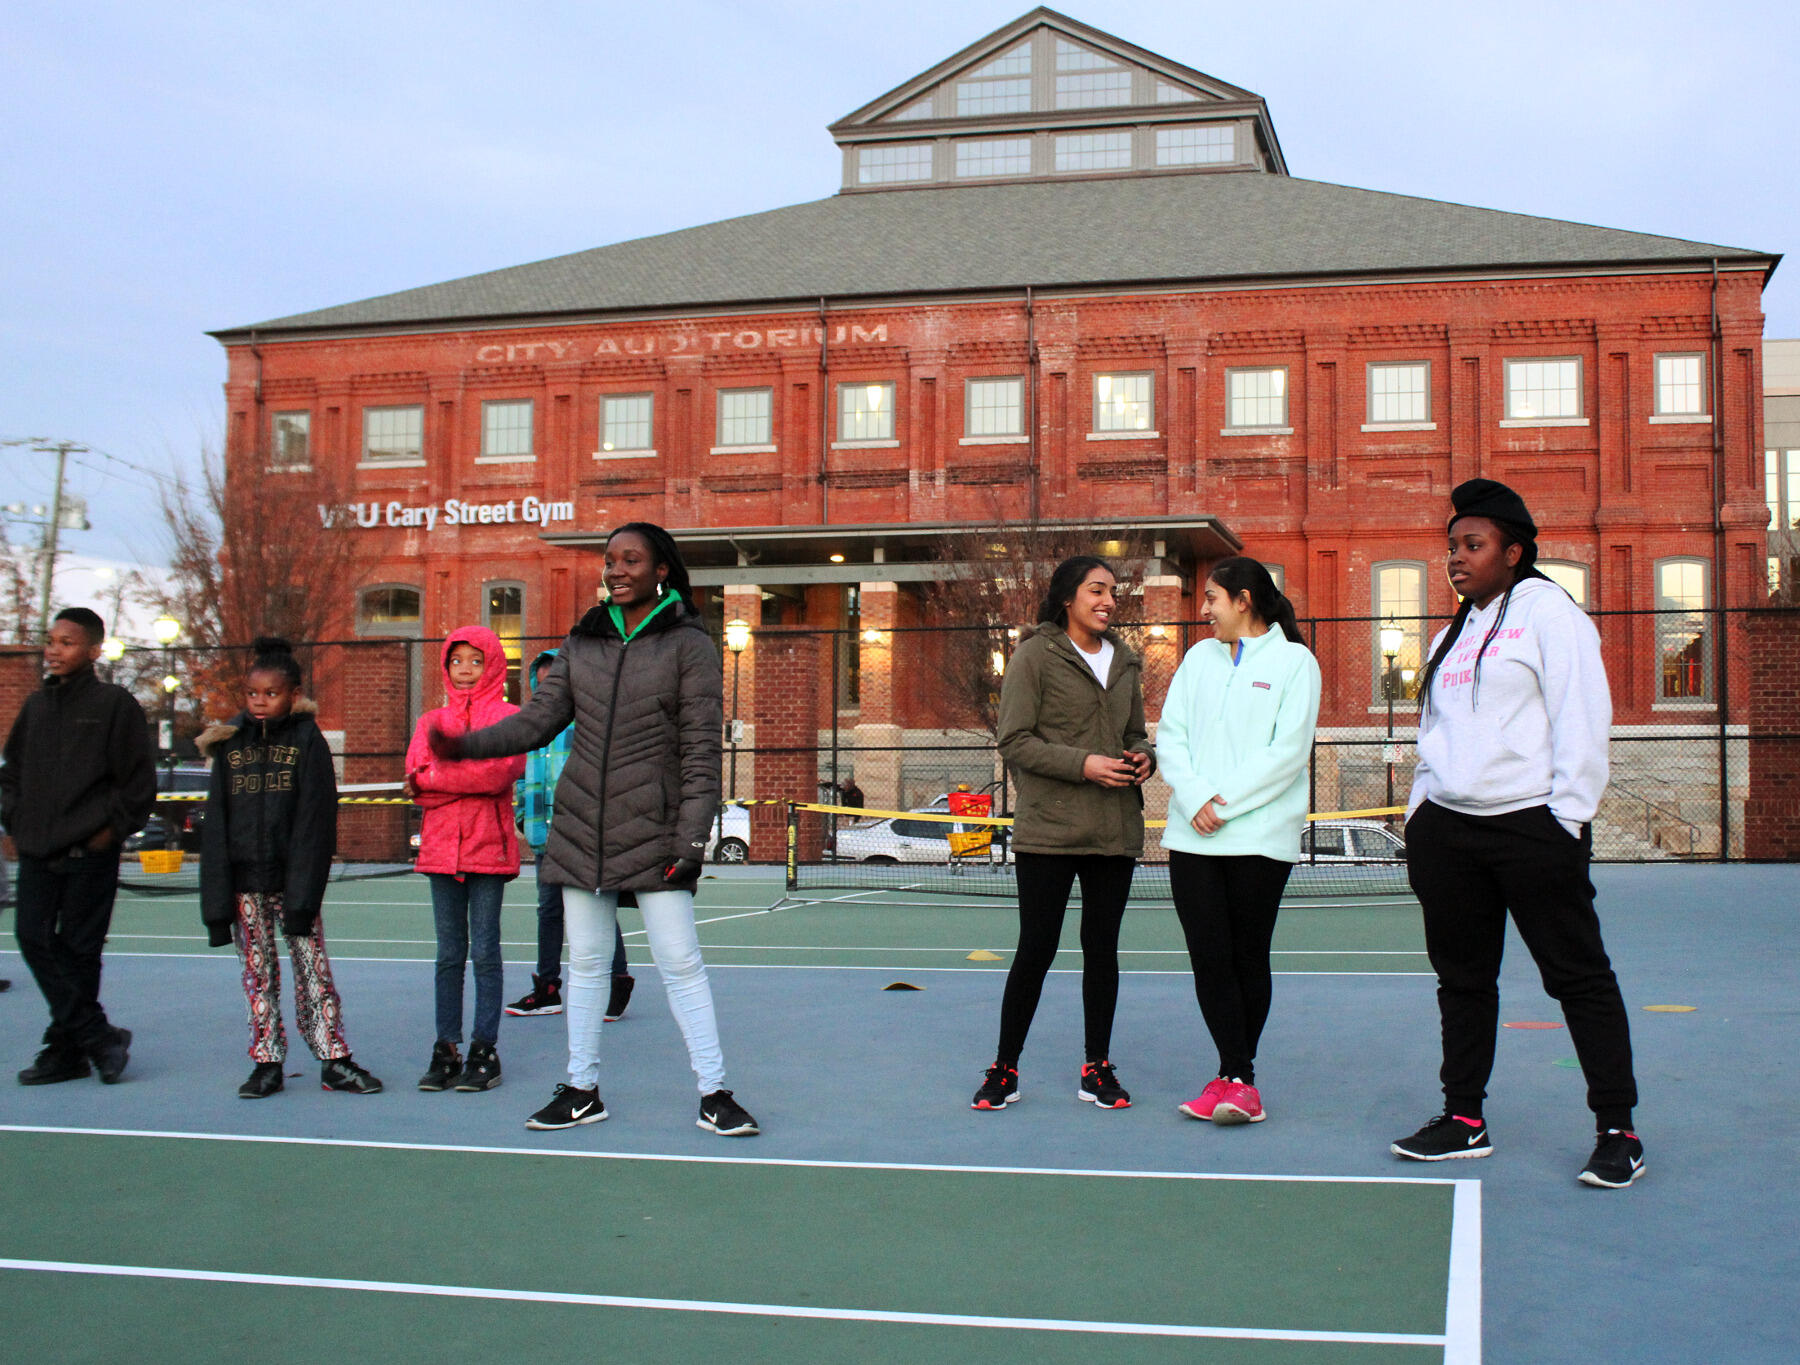 Kids, staff and volunteers take part in a team exercise before starting tennis practice.